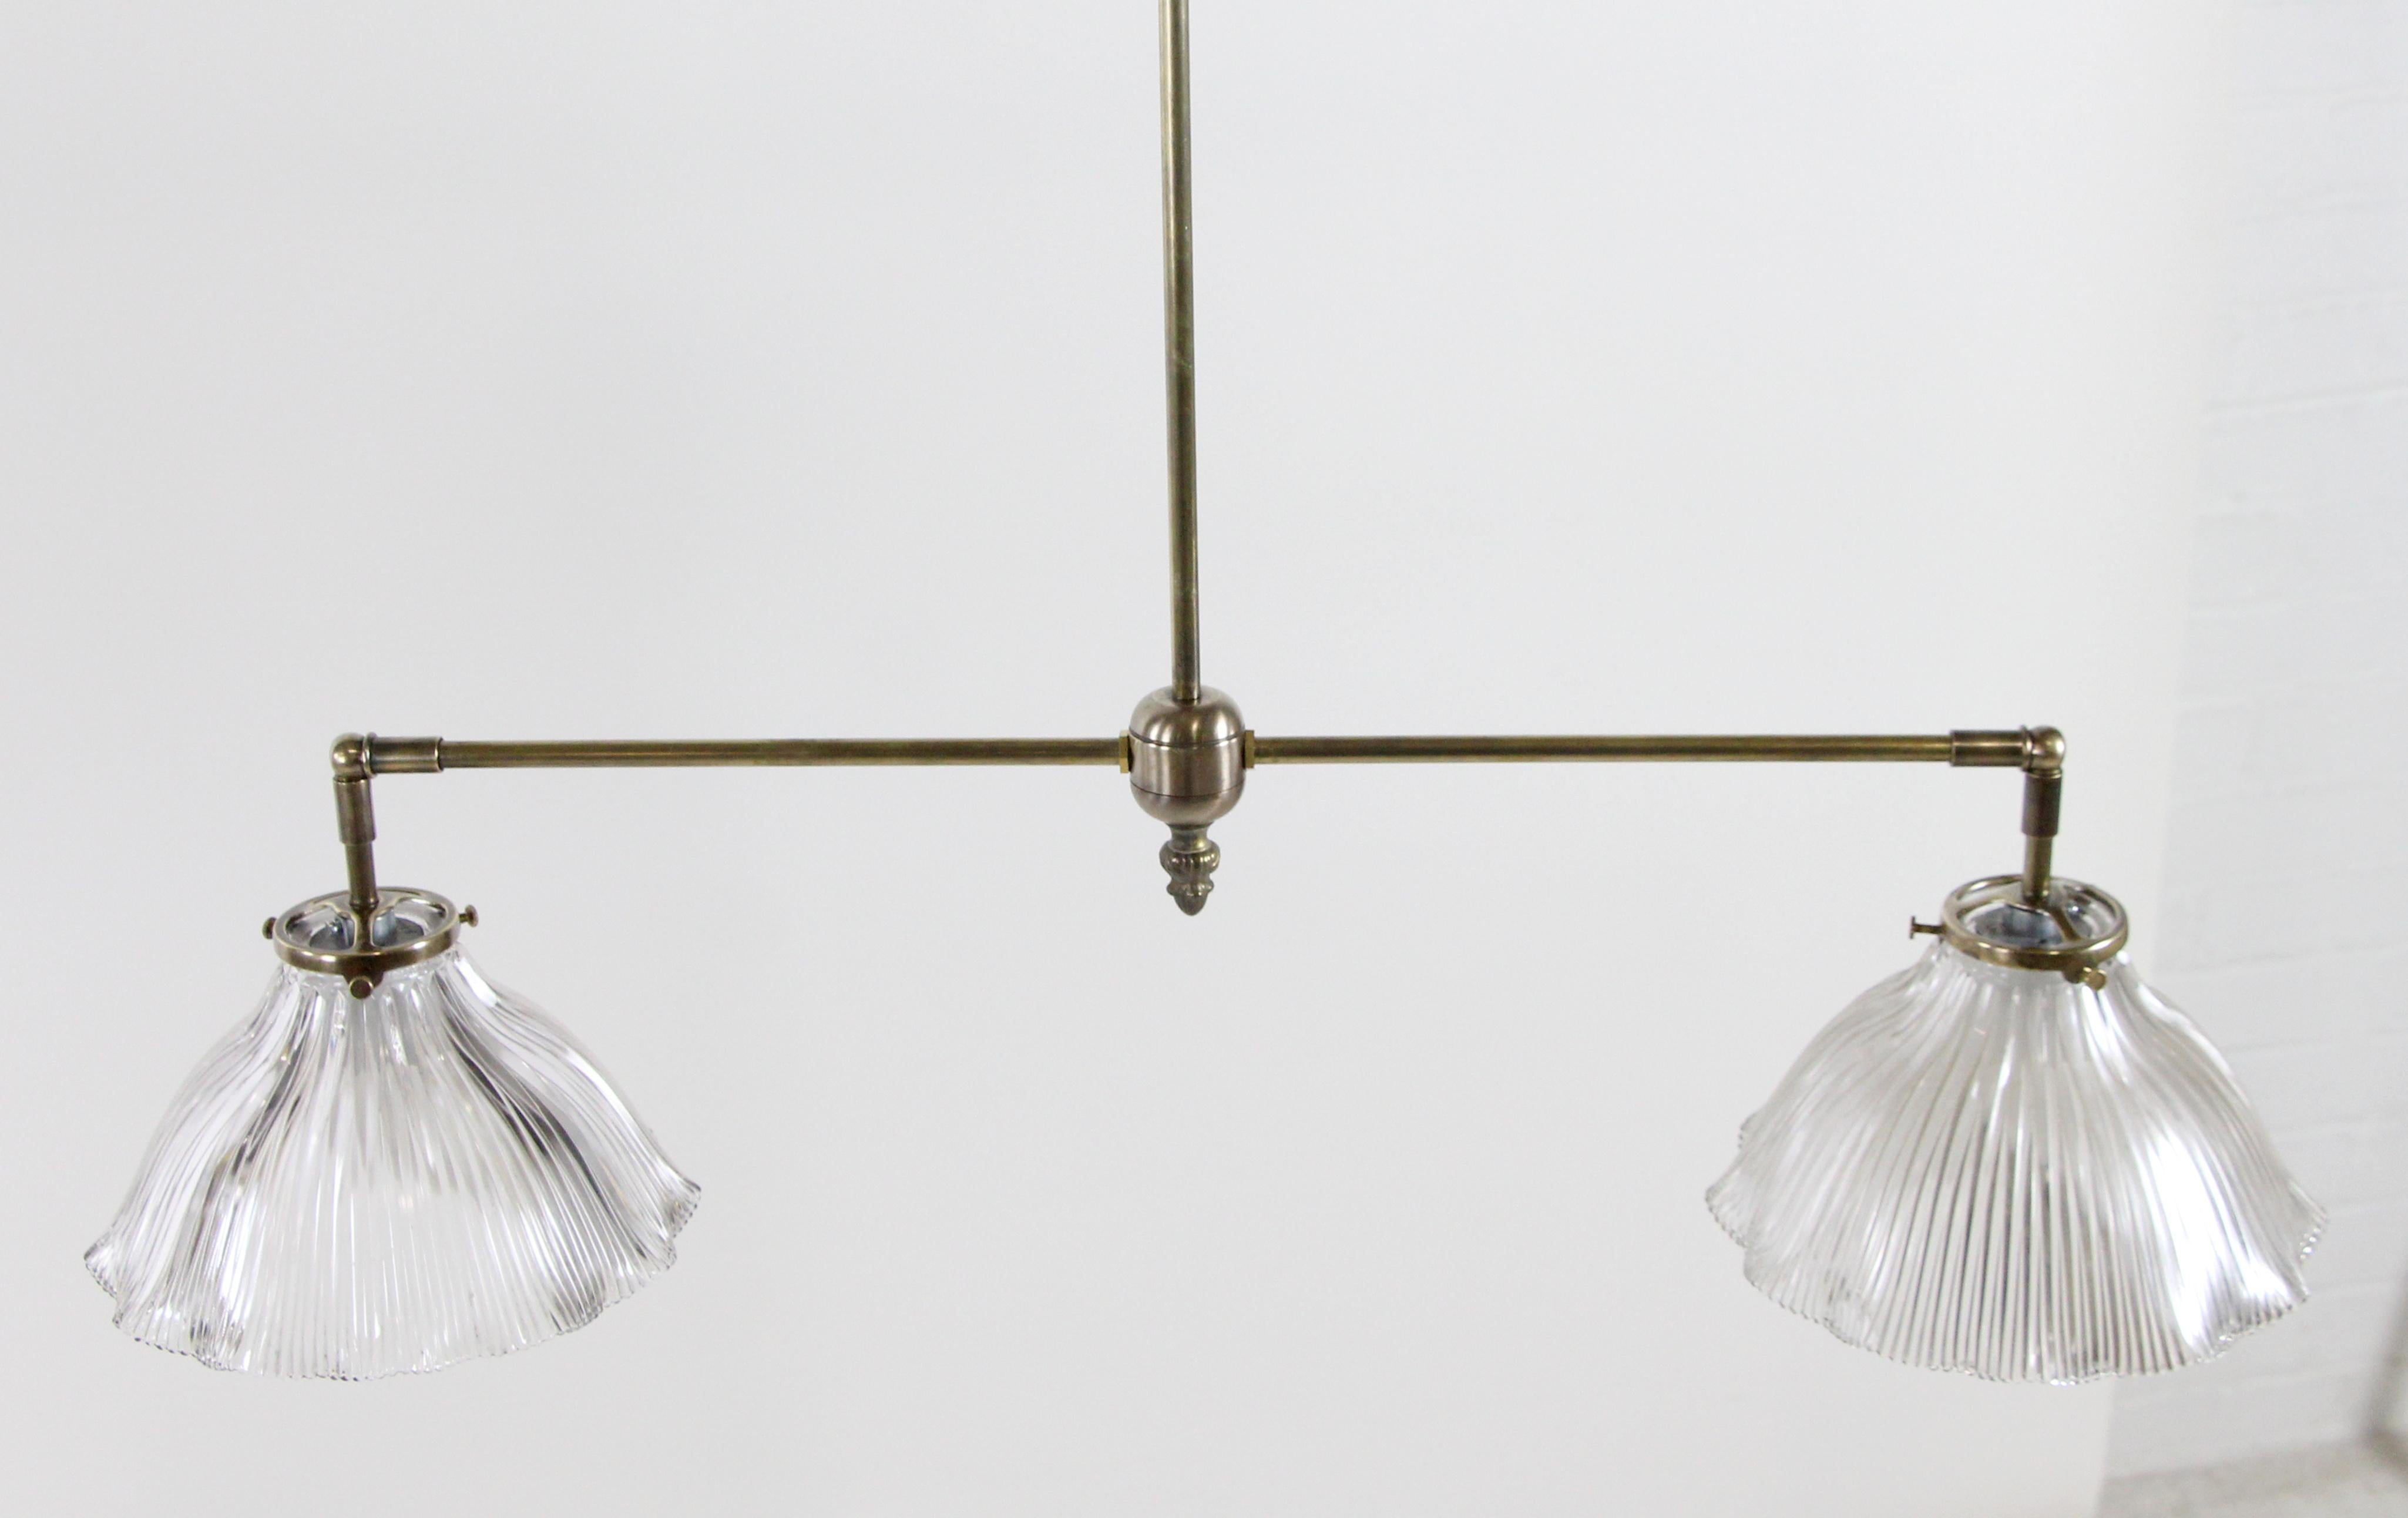 New modern brass double pendant light fixture with original antique clear ruffled prism glass Holophane shades with pinstripe detail. Price includes restoration. Please allow 1-2 weeks to process.